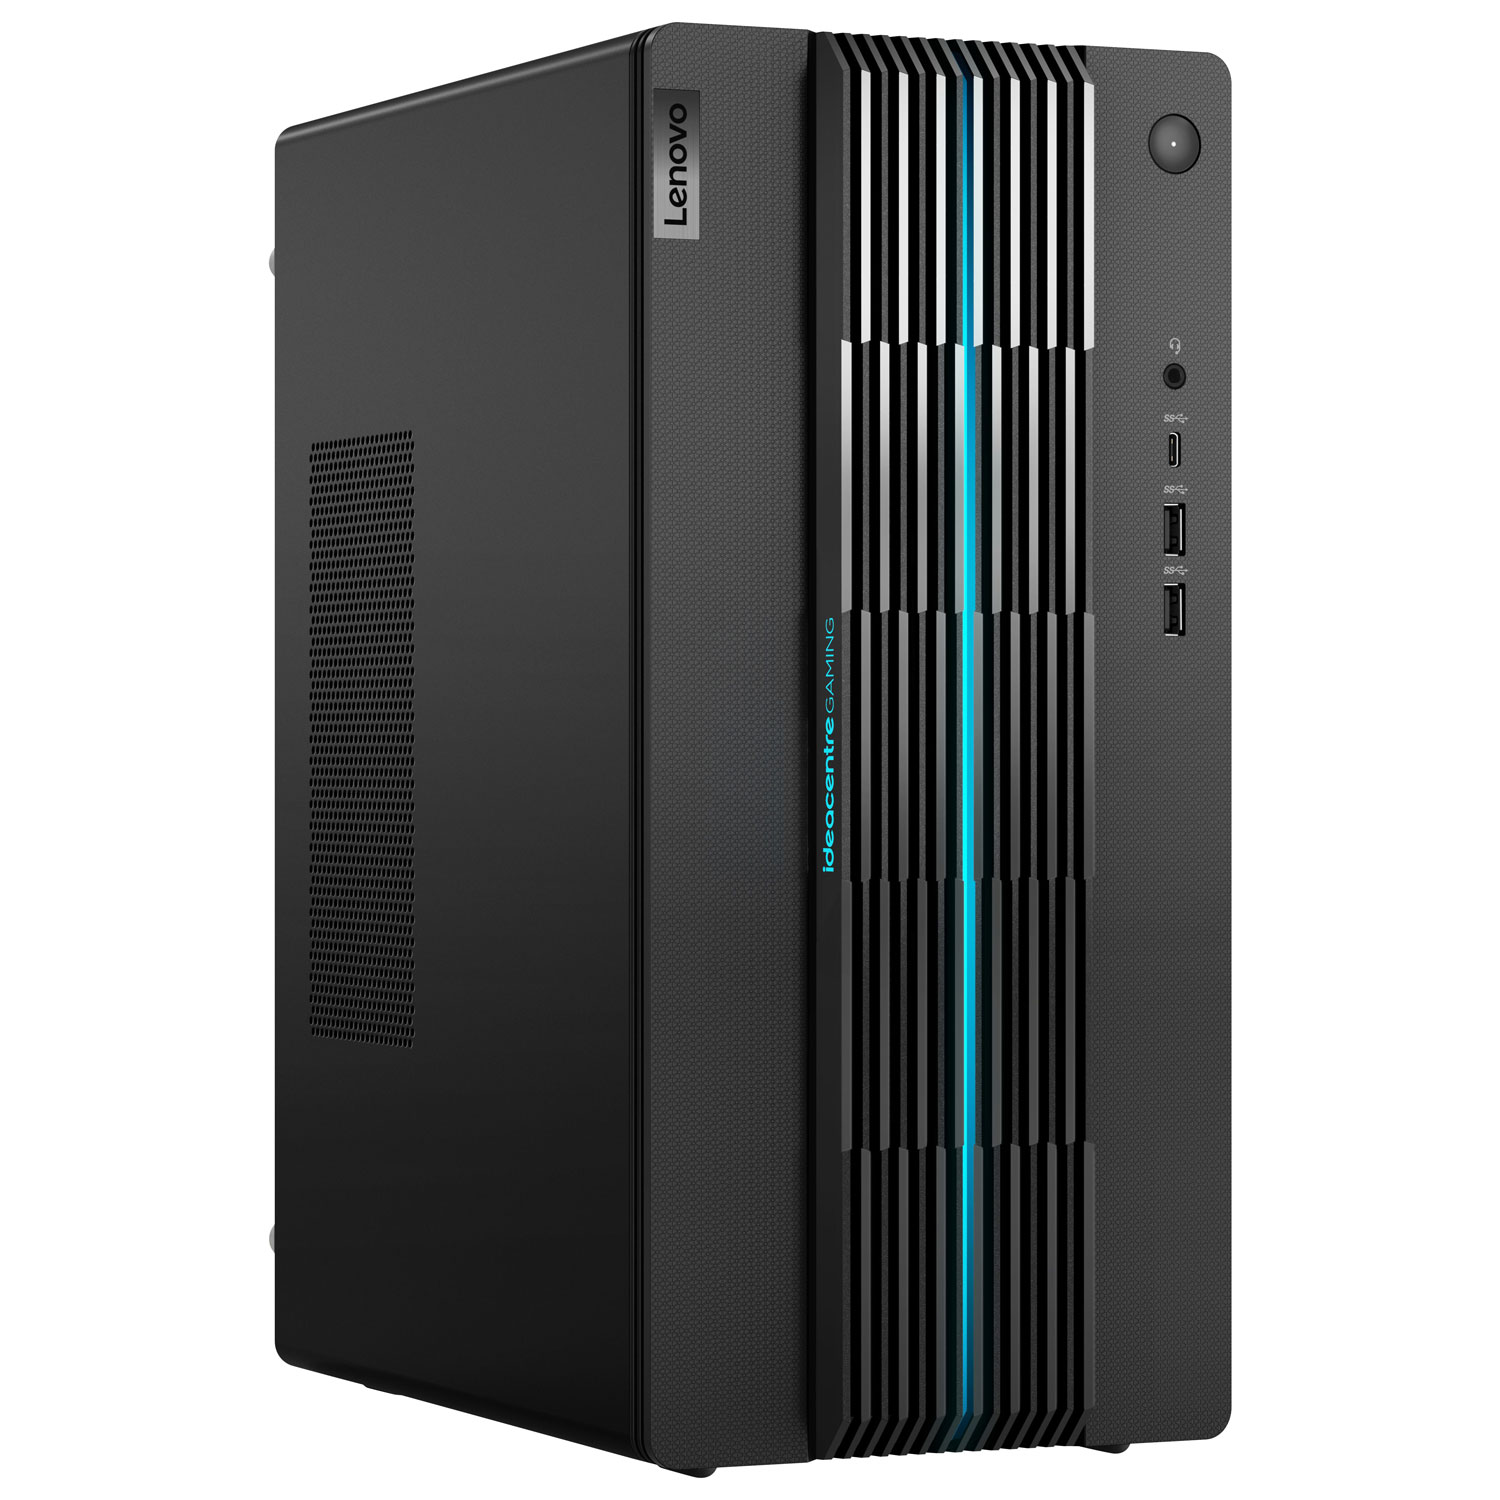 Lenovo IdeaCentre Gaming 5i Desktop PC (Intel Core i7-12700/1TB HDD/512GB SSD/16GB RAM/RTX 3060) -Eng - Only at Best Buy